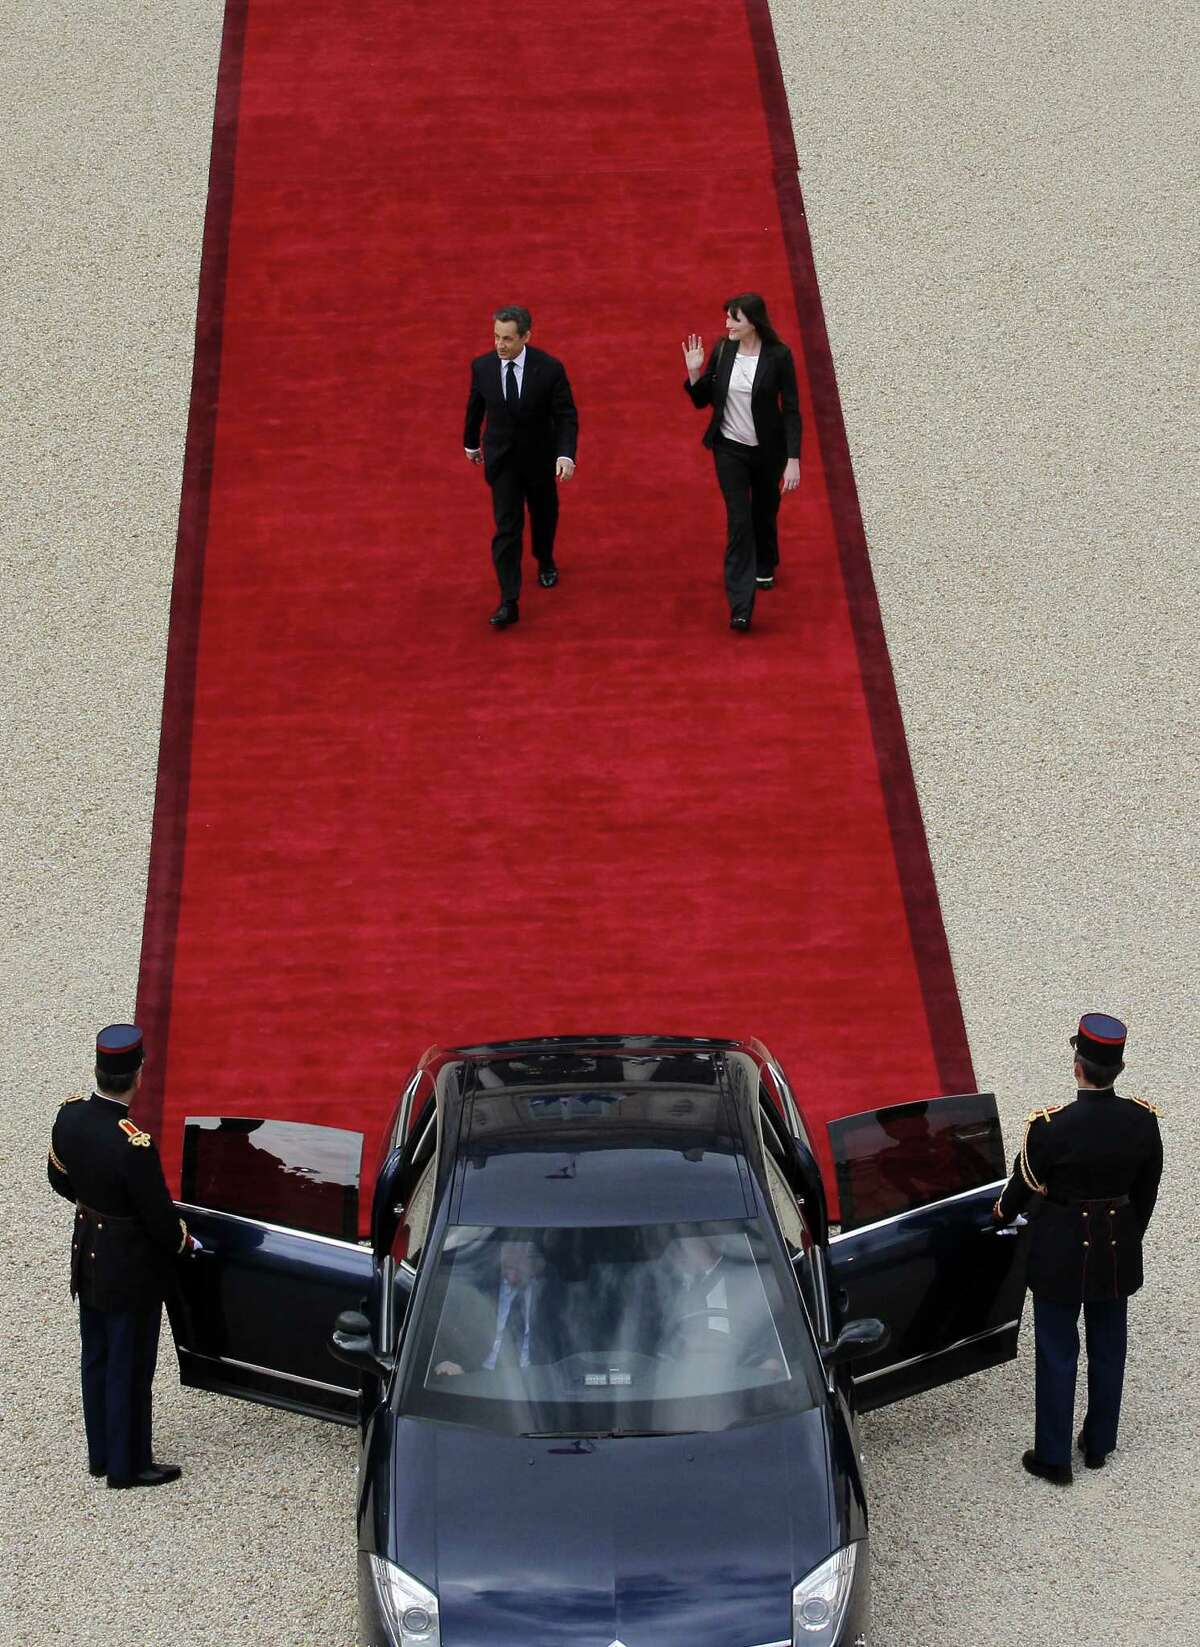 Former France's president Nicolas Sarkozy (L) and his wife Carla Bruni-Sarkozy leave the Elysee presidential Palace after the formal investiture ceremony between France's president-elect Francois Hollande and his predecessor Nicolas Sarkozy, on May 15, 2012 in Paris.